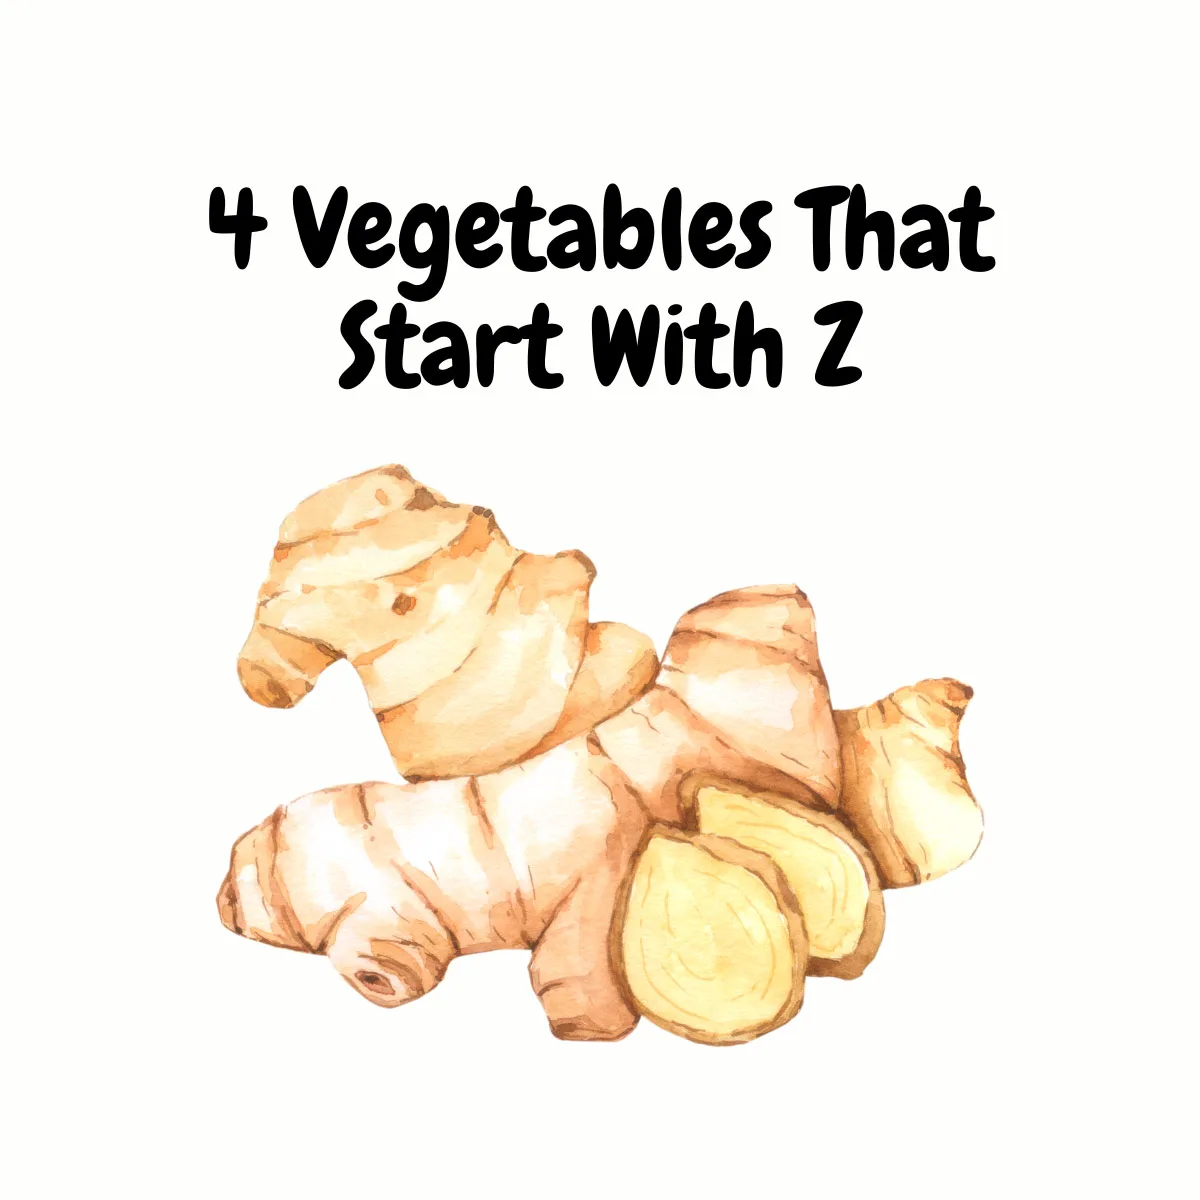 Vegetables That Start With Z featured image | Girl Meets Food